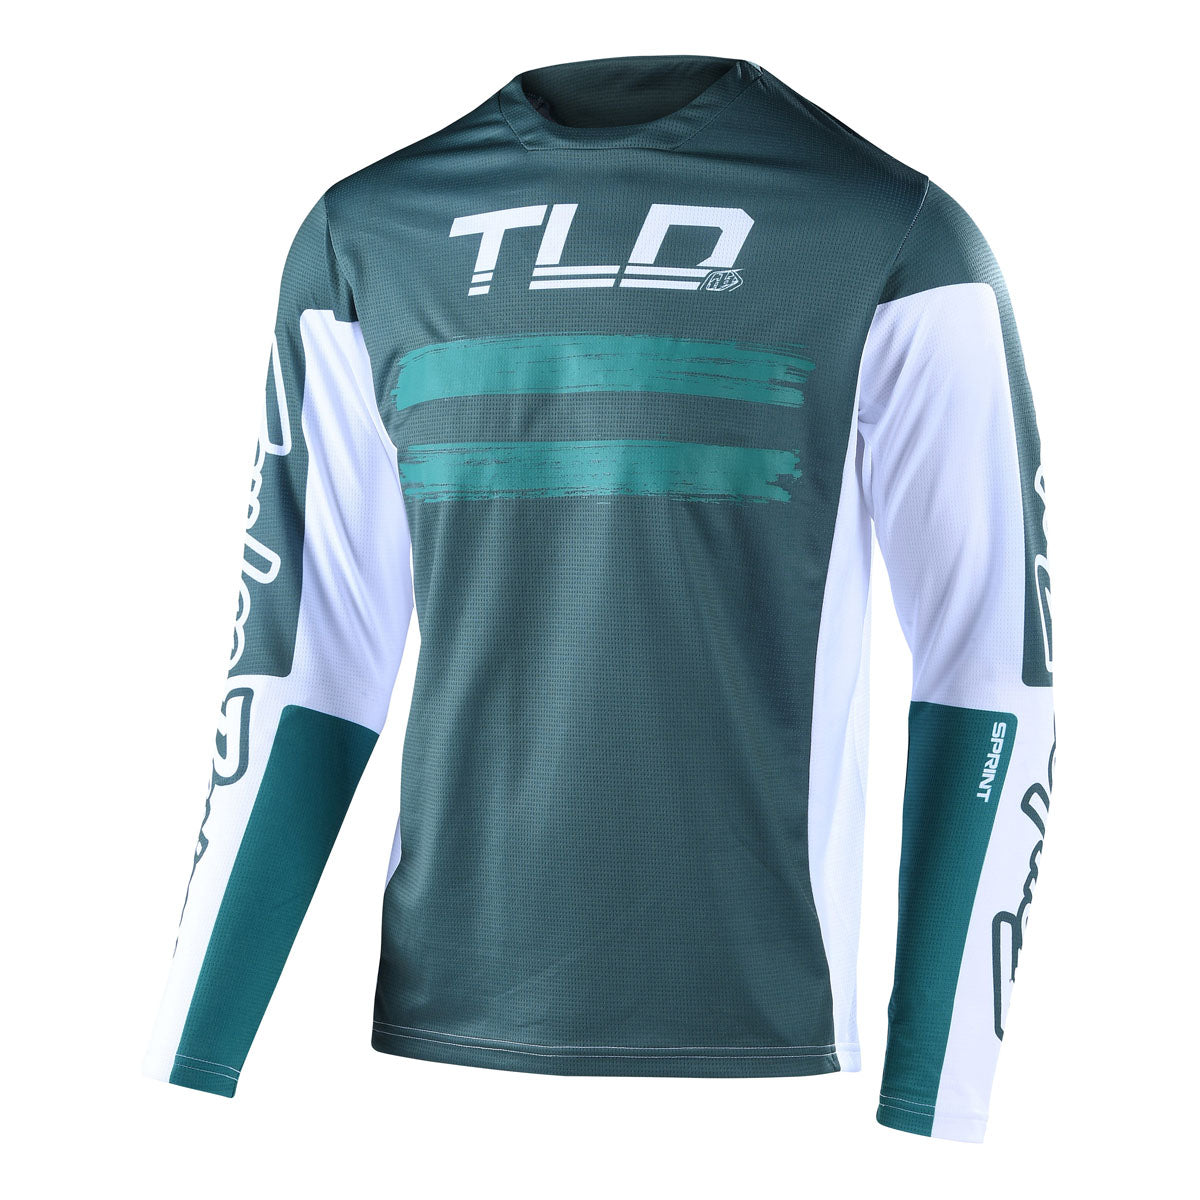 Troy Lee Designs Sprint Jersey (CLOSEOUT) - Marker Jungle / Ivy